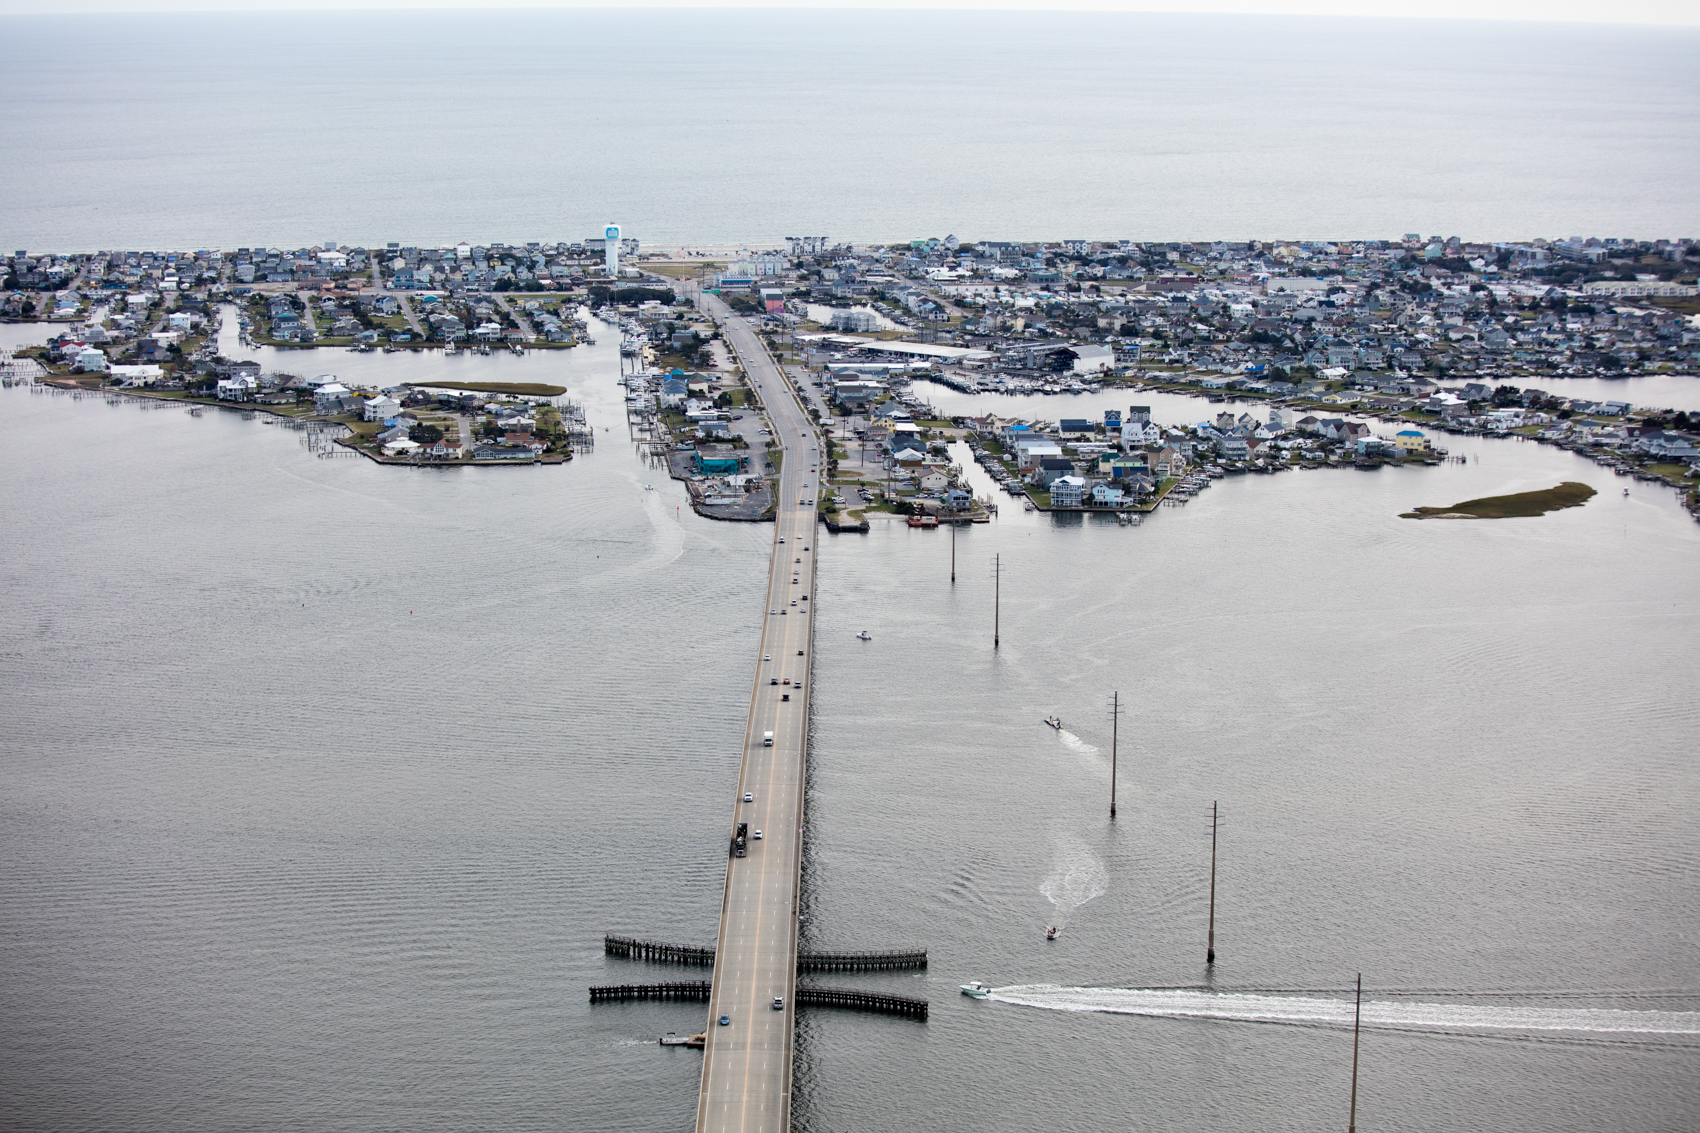 The Atlantic Beach Bridge in Morehead City, North Carolina is one of two bridges that connects the nearly 27 mile long barrier island to the mainland.